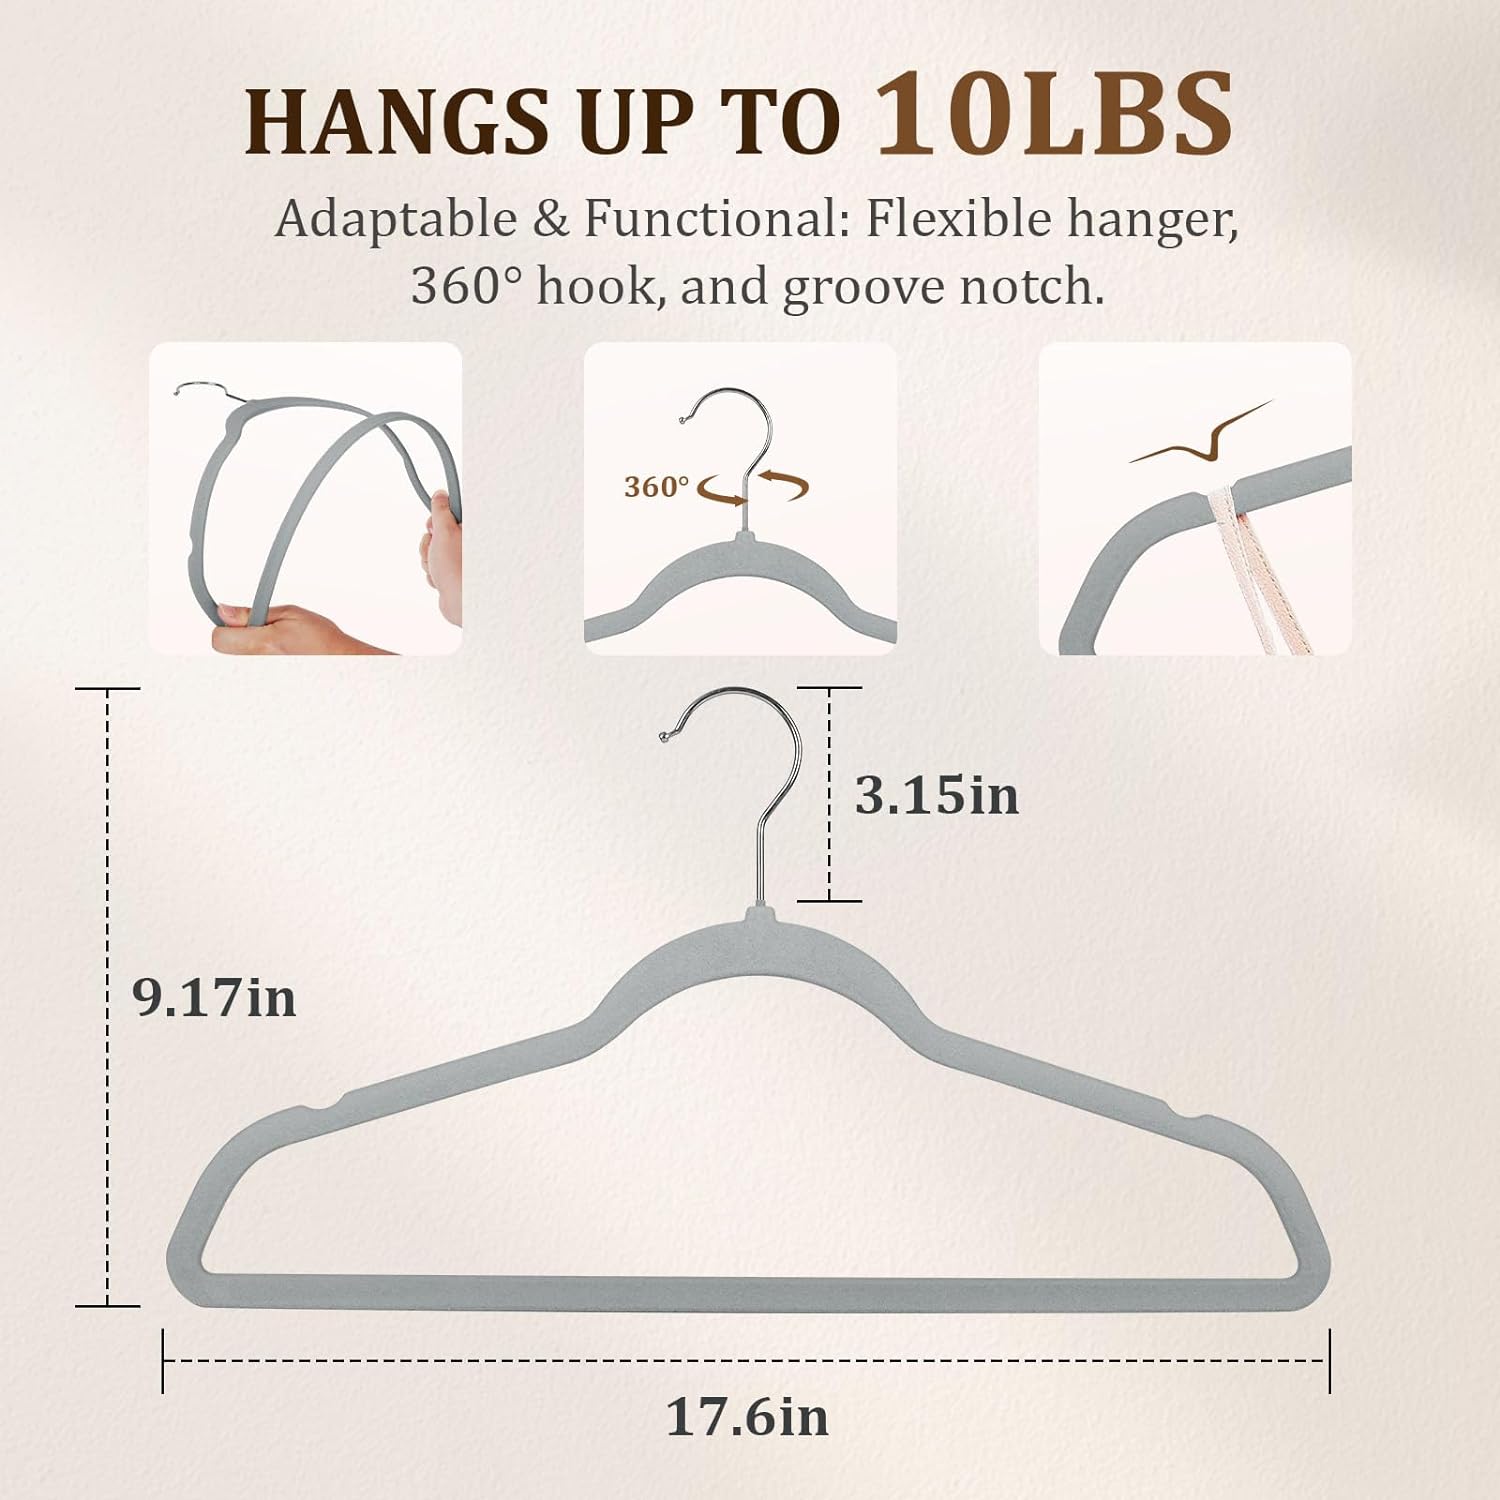 Plastic Hangers - Space Saving Notched Hangers by